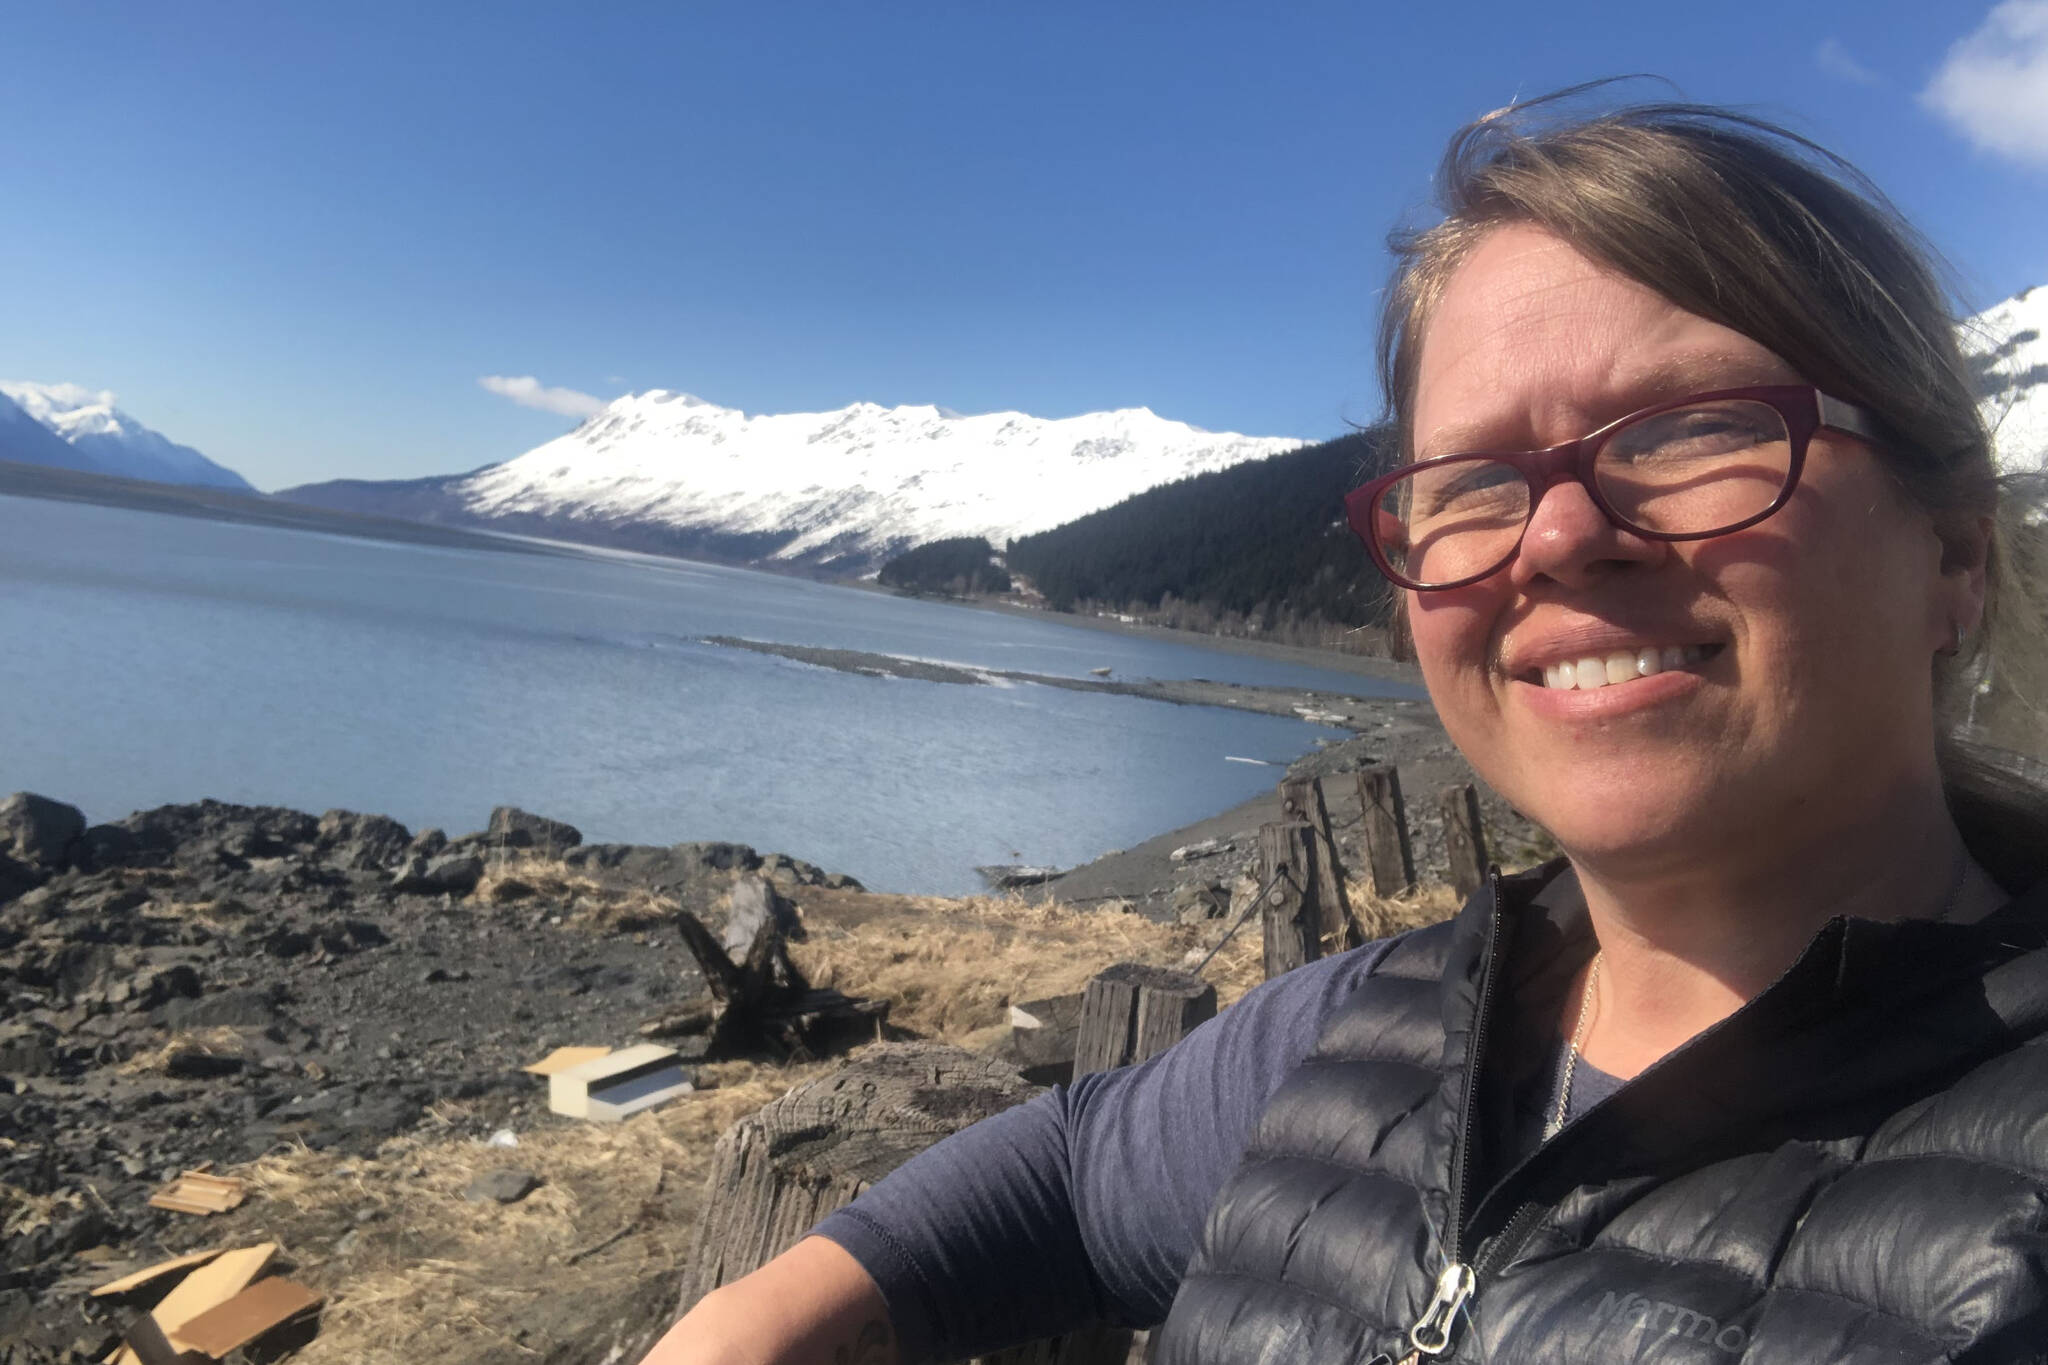 Soldotna resident Karyn Griffin, seen here, has joined the list of candidates vying for Alaska’s newly vacant seat in the U.S. House of Representatives. The seat was formerly held by Rep. Don Young, who died March 18, 2022, after nearly 50 years in office. (Photo courtesy Karyn Griffin)